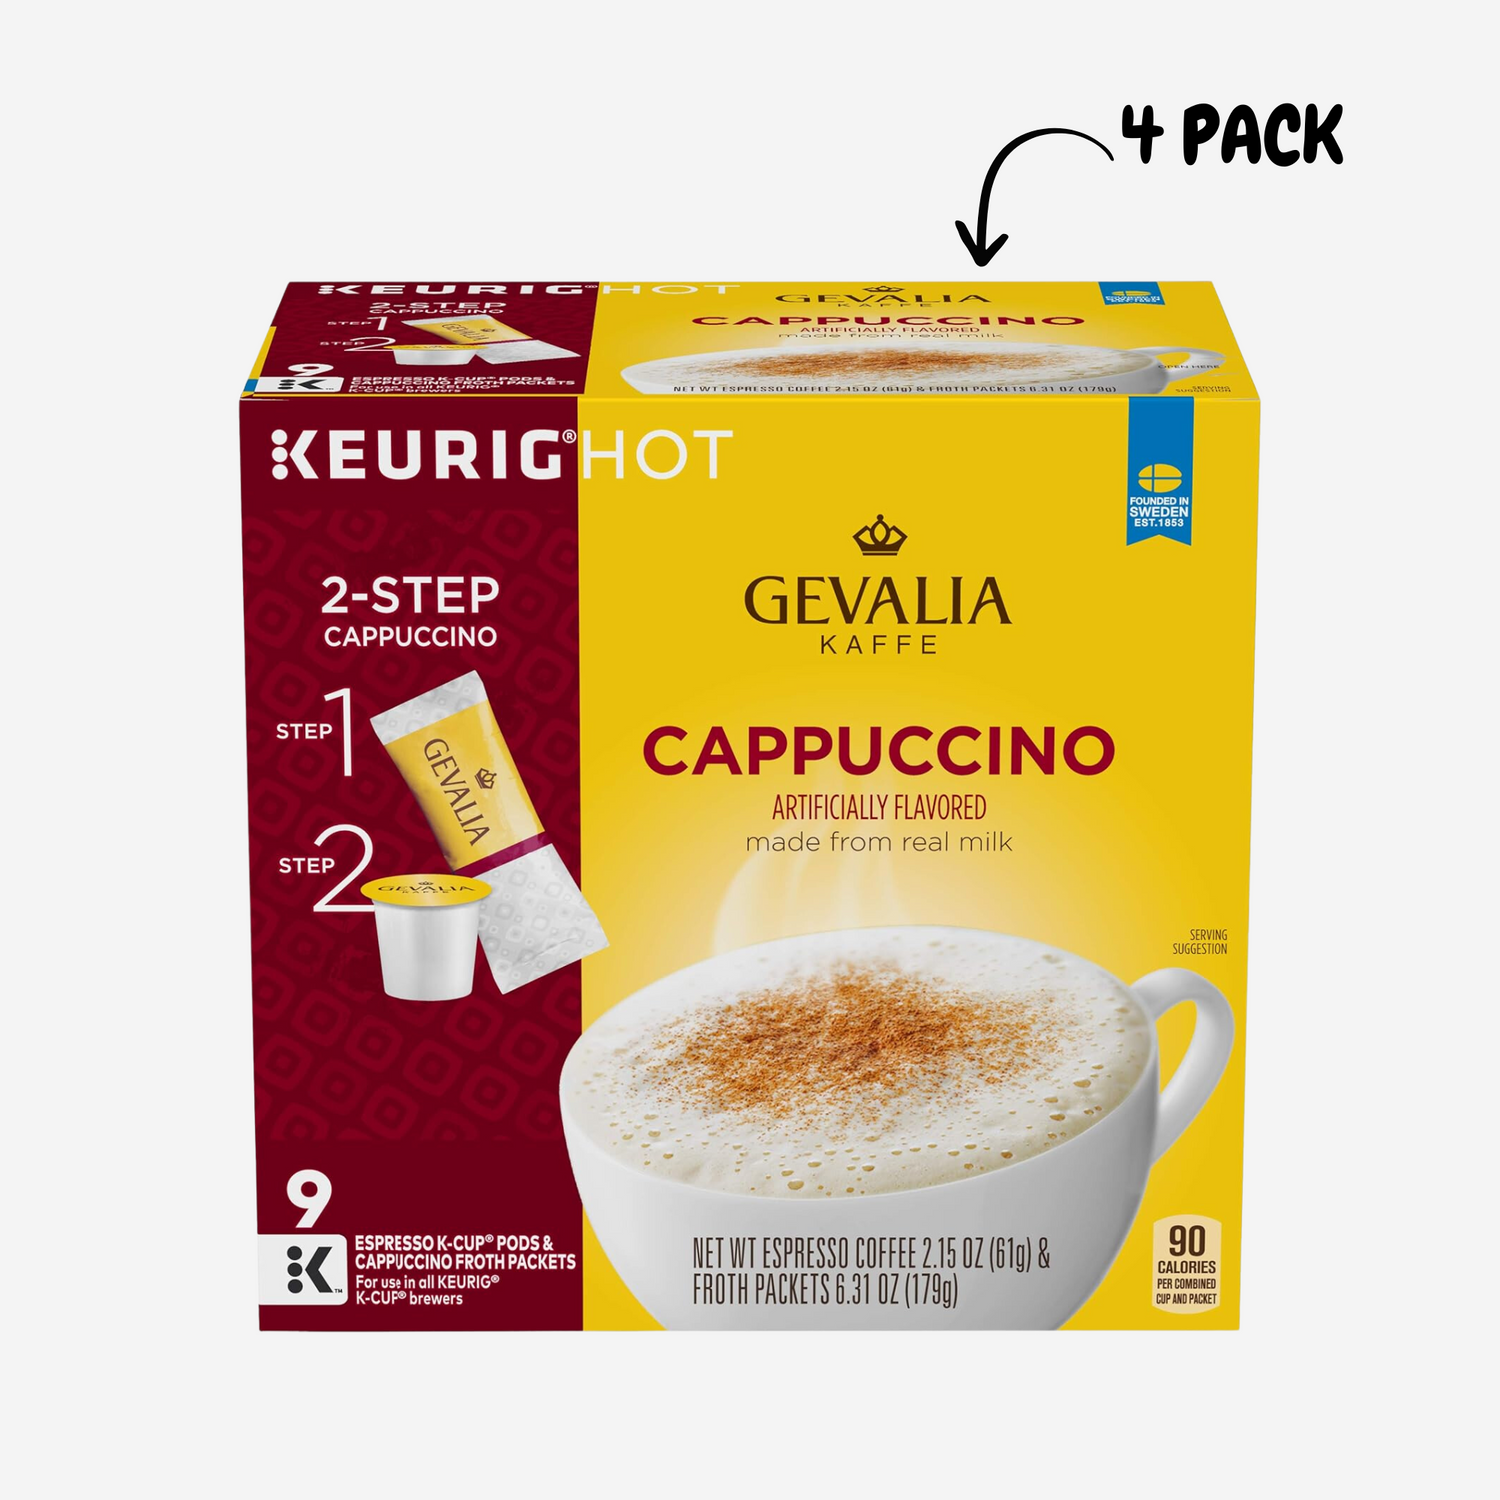 Gevalia Cappuccino Espresso K-Cup Coffee Pods & Froth Packets (36 Pods and Froth Packets), 9 Count (Pack of 4)